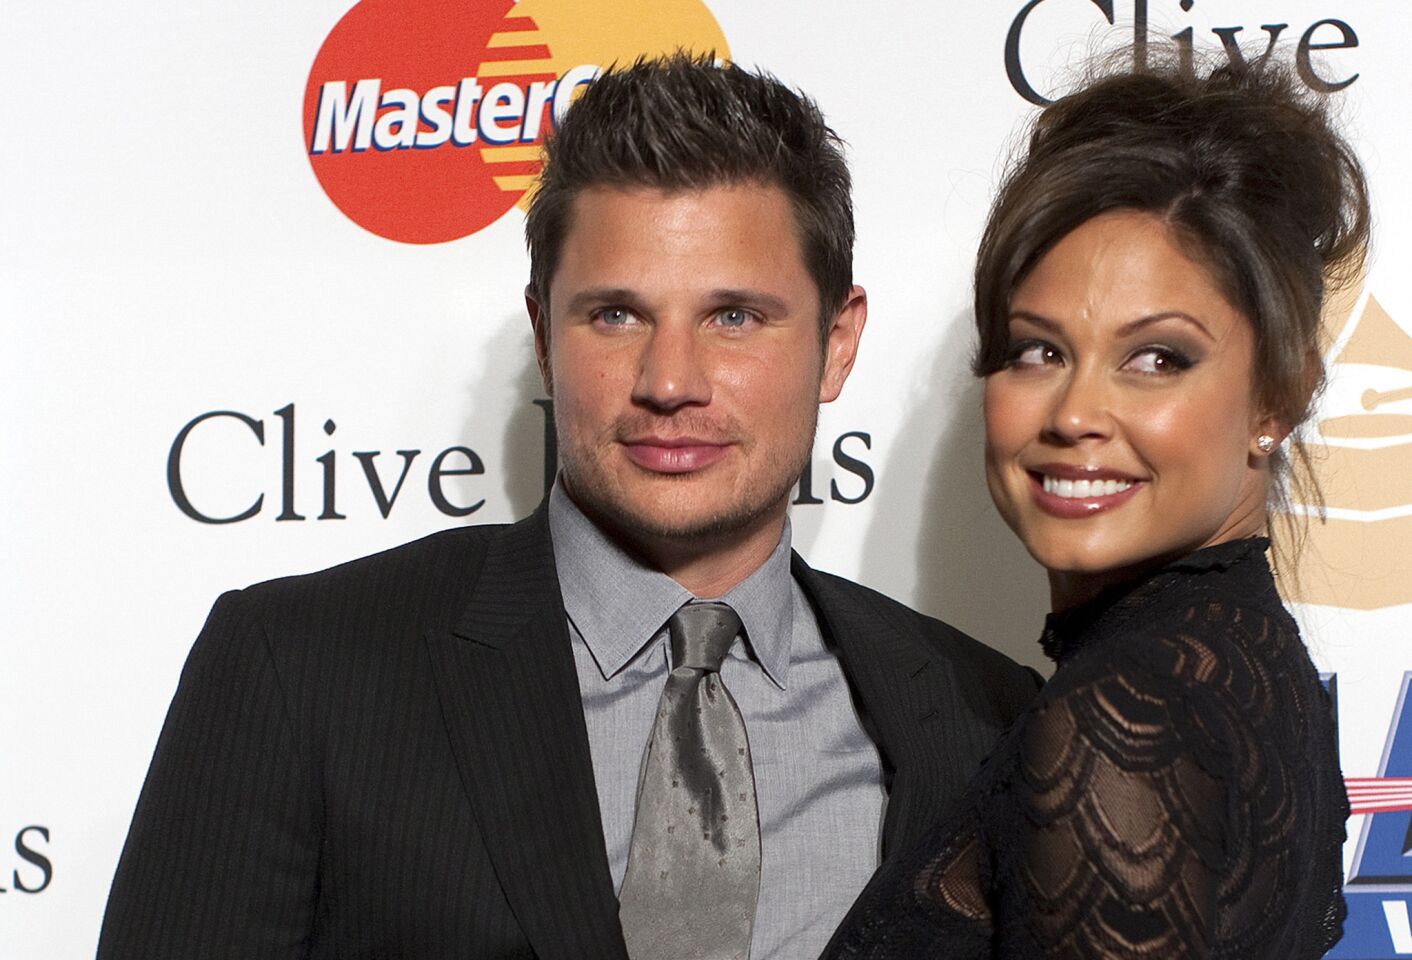 Nick and Vanessa Lachey are now second-time parents to daughter Brooklyn Elisabeth, which means toddler son Camden Johnson now has a little sister. "I have been dreaming of this moment for as long as I can remember, the day I was going to meet my little girl," Vanessa wrote on her website.